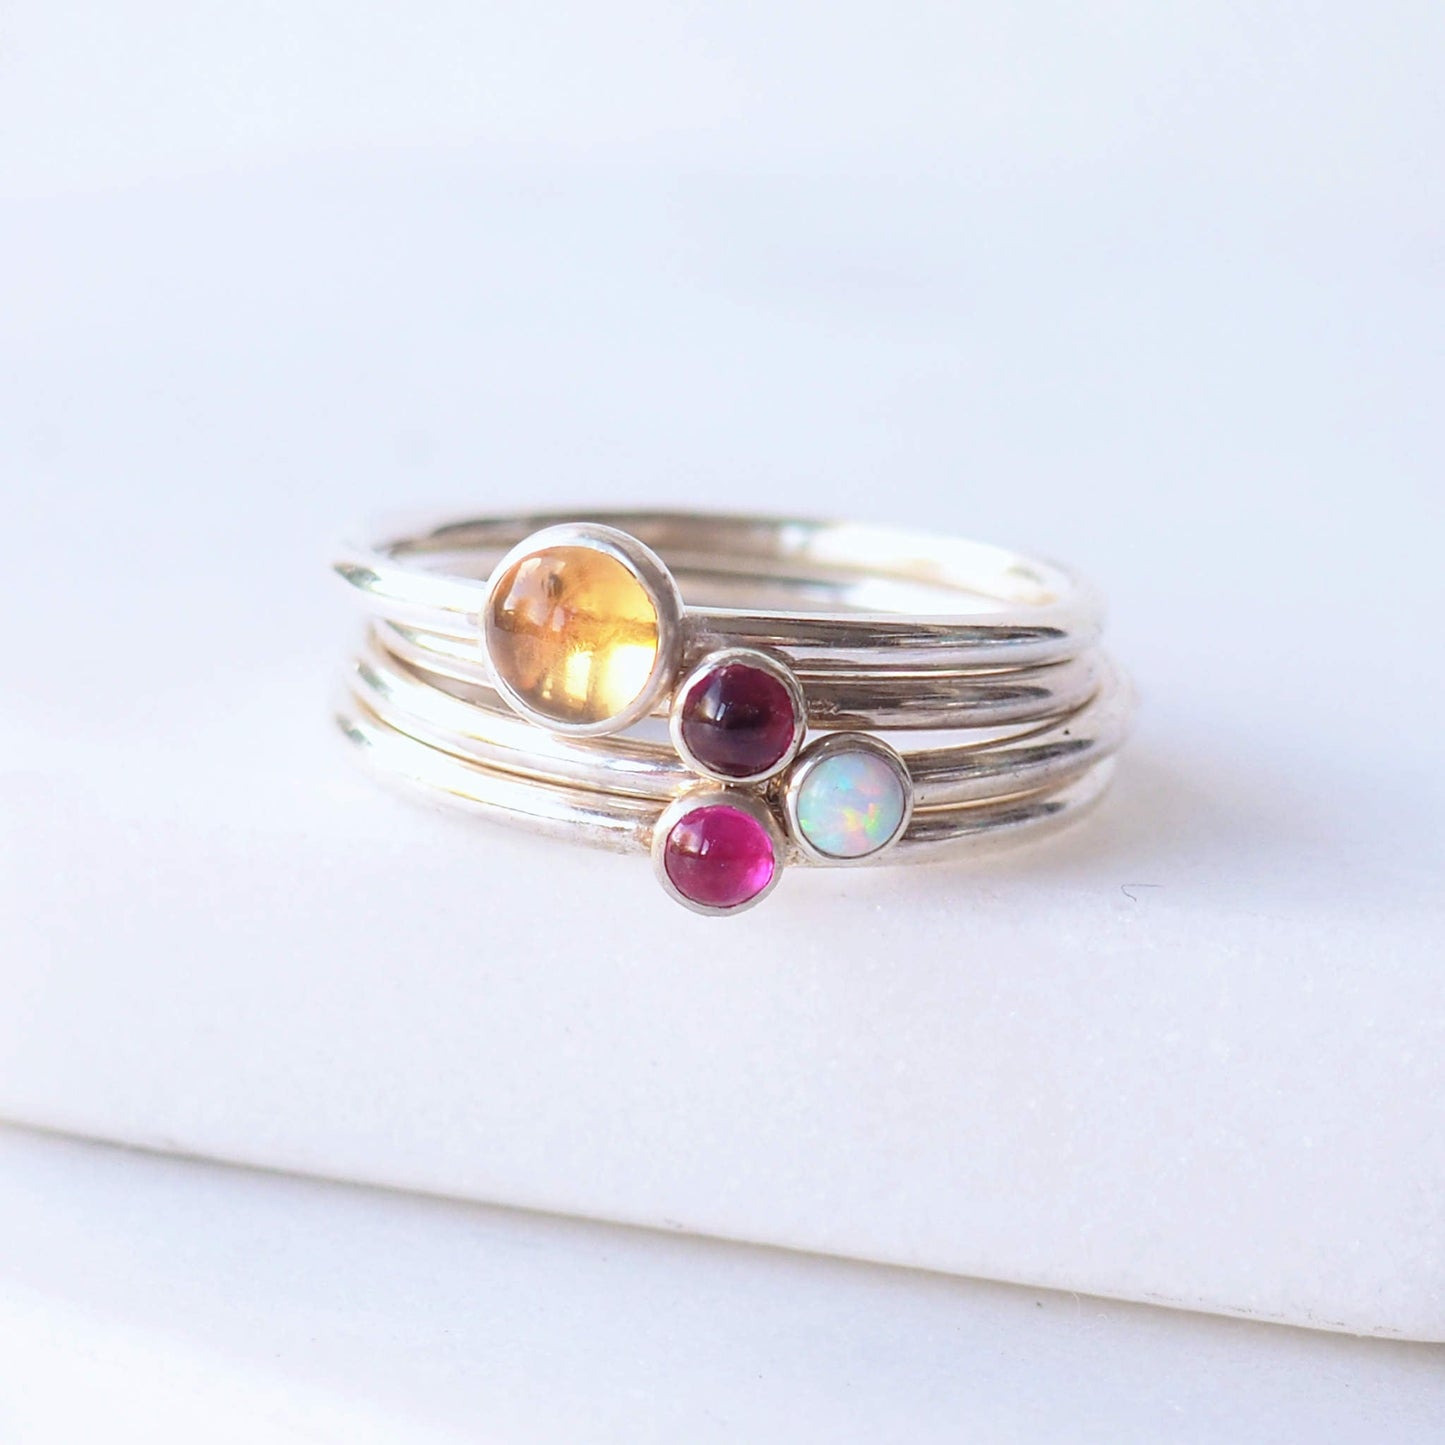 Four Silver birthstone rings with a large round Yellow Citrine for November with three additional birthstone rings of your choice, picture shows deep red garnet, pink lab ruby and white lab opal. Handmade by maram jewellery in Scotland UK